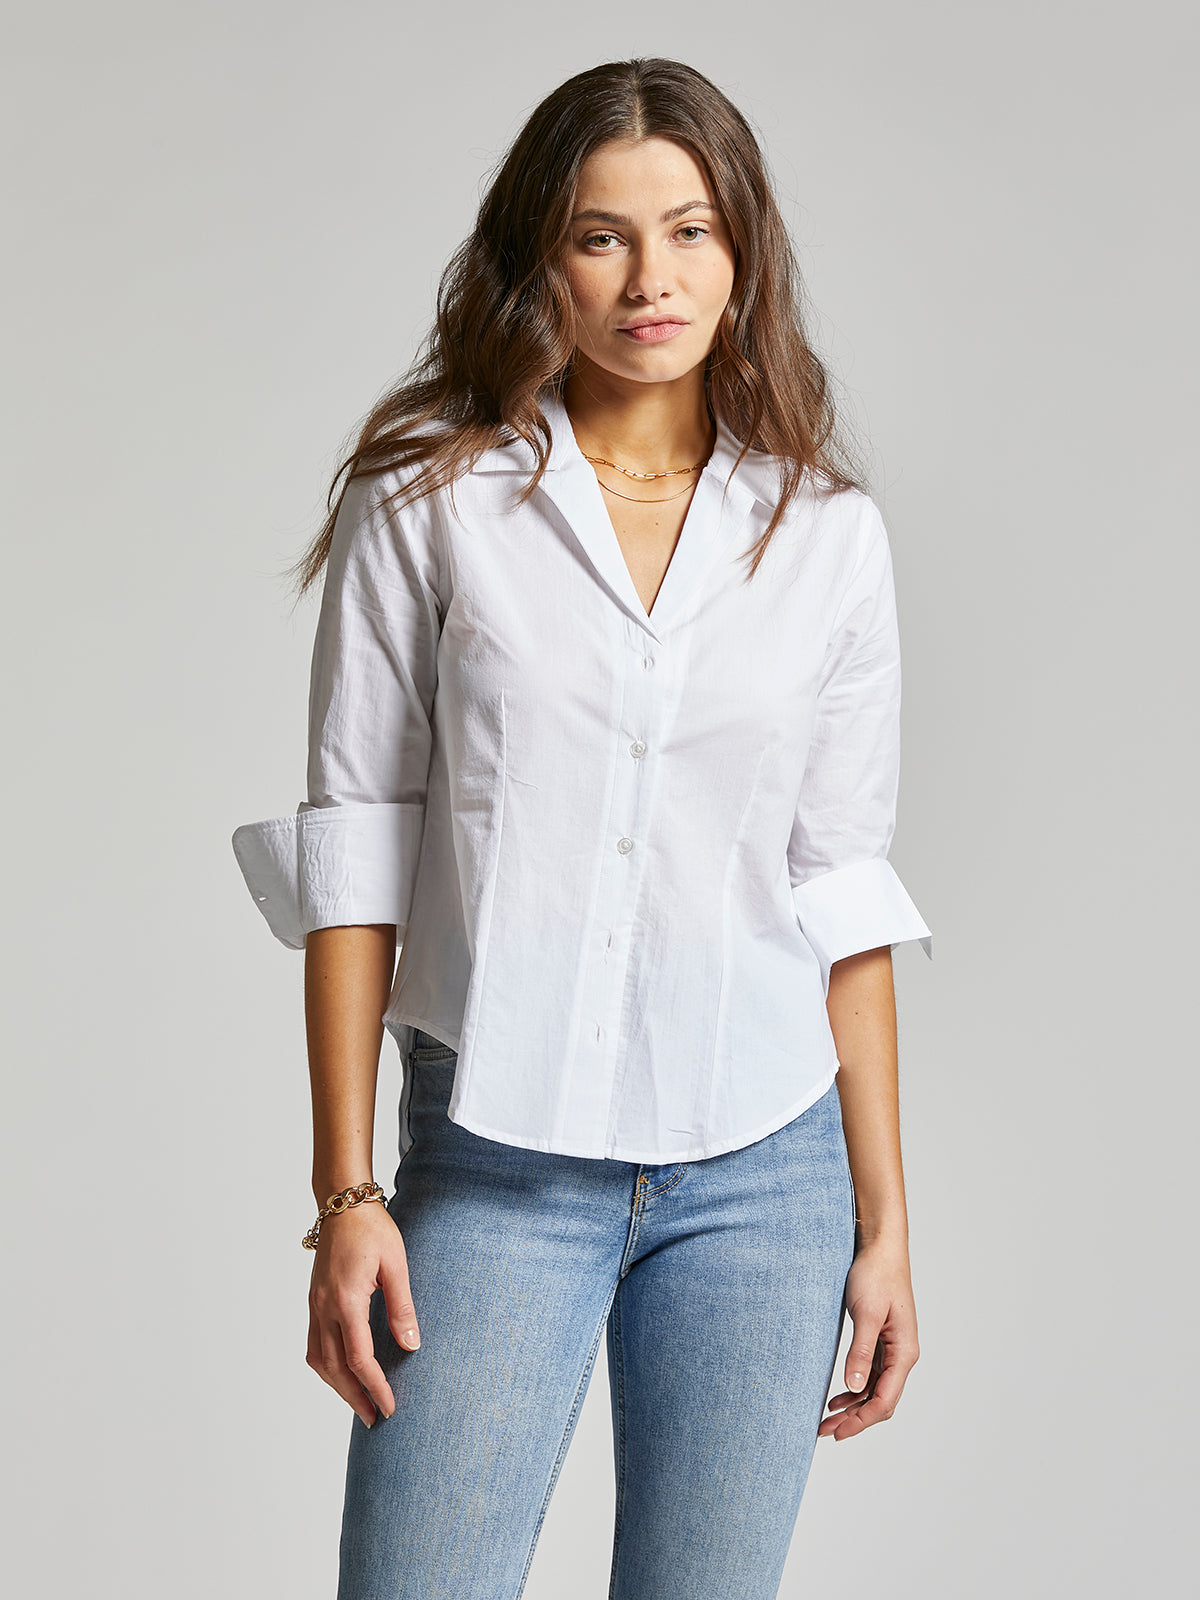 White Work Top Apex Ethical Boutique